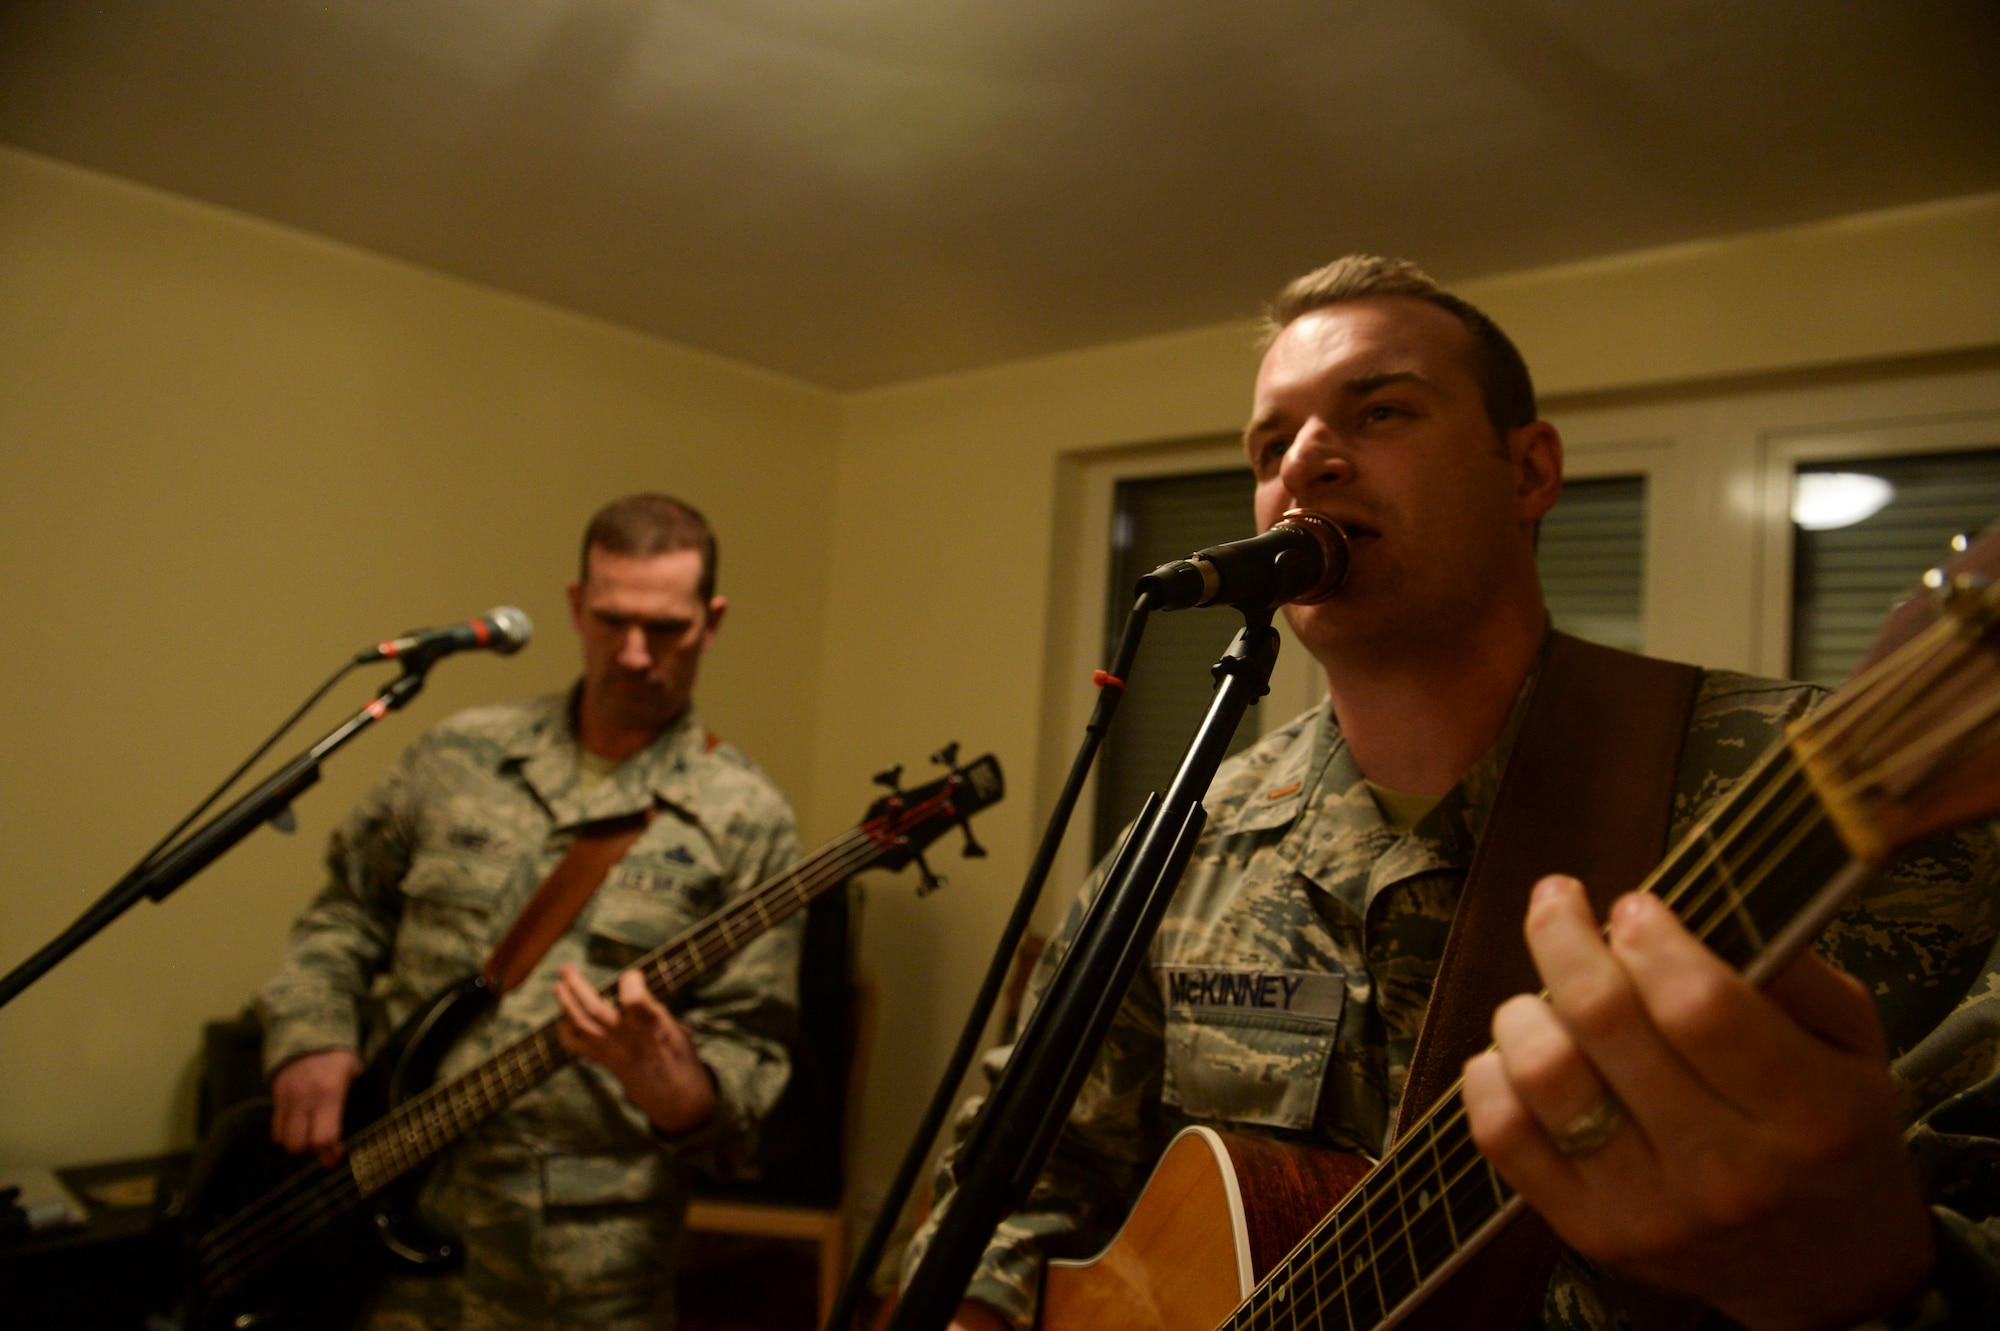 U.S. Air Force 2nd Lt. John McKinney, 52nd Aircraft Maintenance Squadron assistant officer in charge of the 480th Aircraft Maintenance Unit from New Ellenton, S.C., sings a song during a rehearsal session with Weekend Duty Jan. 29, 2014, at Spangdahlem Air Base, Germany. McKinney and U.S. Air Force Col . Matt Humes, 52nd Aircraft Maintenance Group commander, started the band during a New Years Eve party. (U.S. Air Force photo by Senior Airman Rusty Frank/Released)